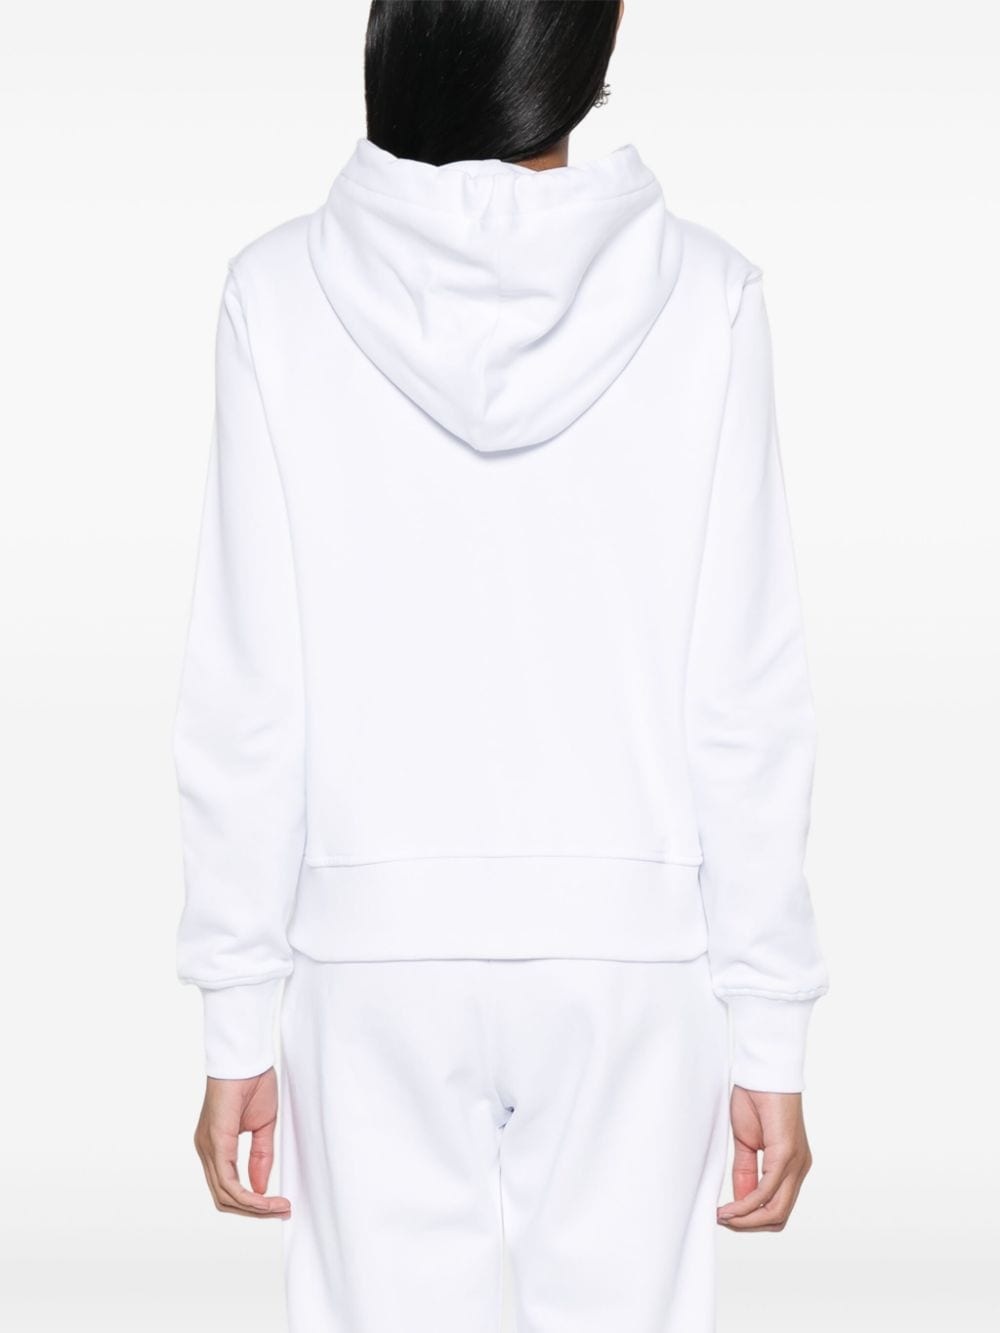 logo-embroidered zip-up hoodie - 4